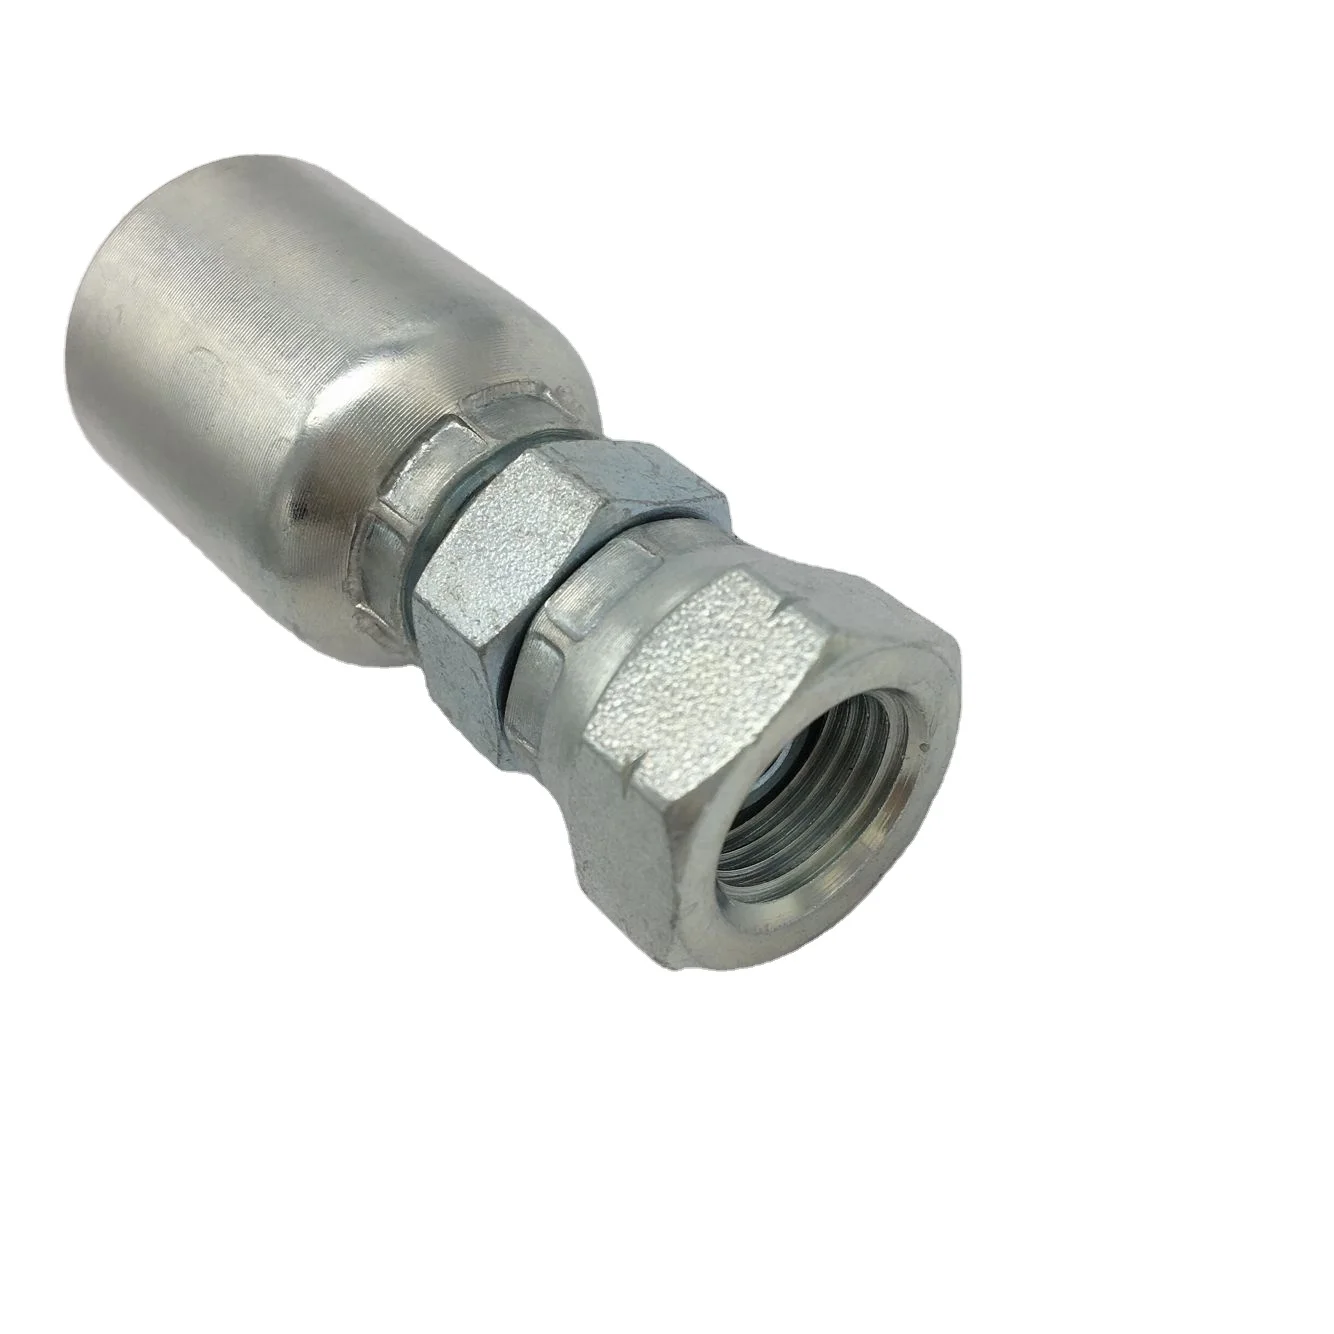 

22611 High Pressure BSP 60 Degree Cone O-ring Female Pipe Fitting Double Hexgaon Hydraulic Hose Fitting One Piece Fittings